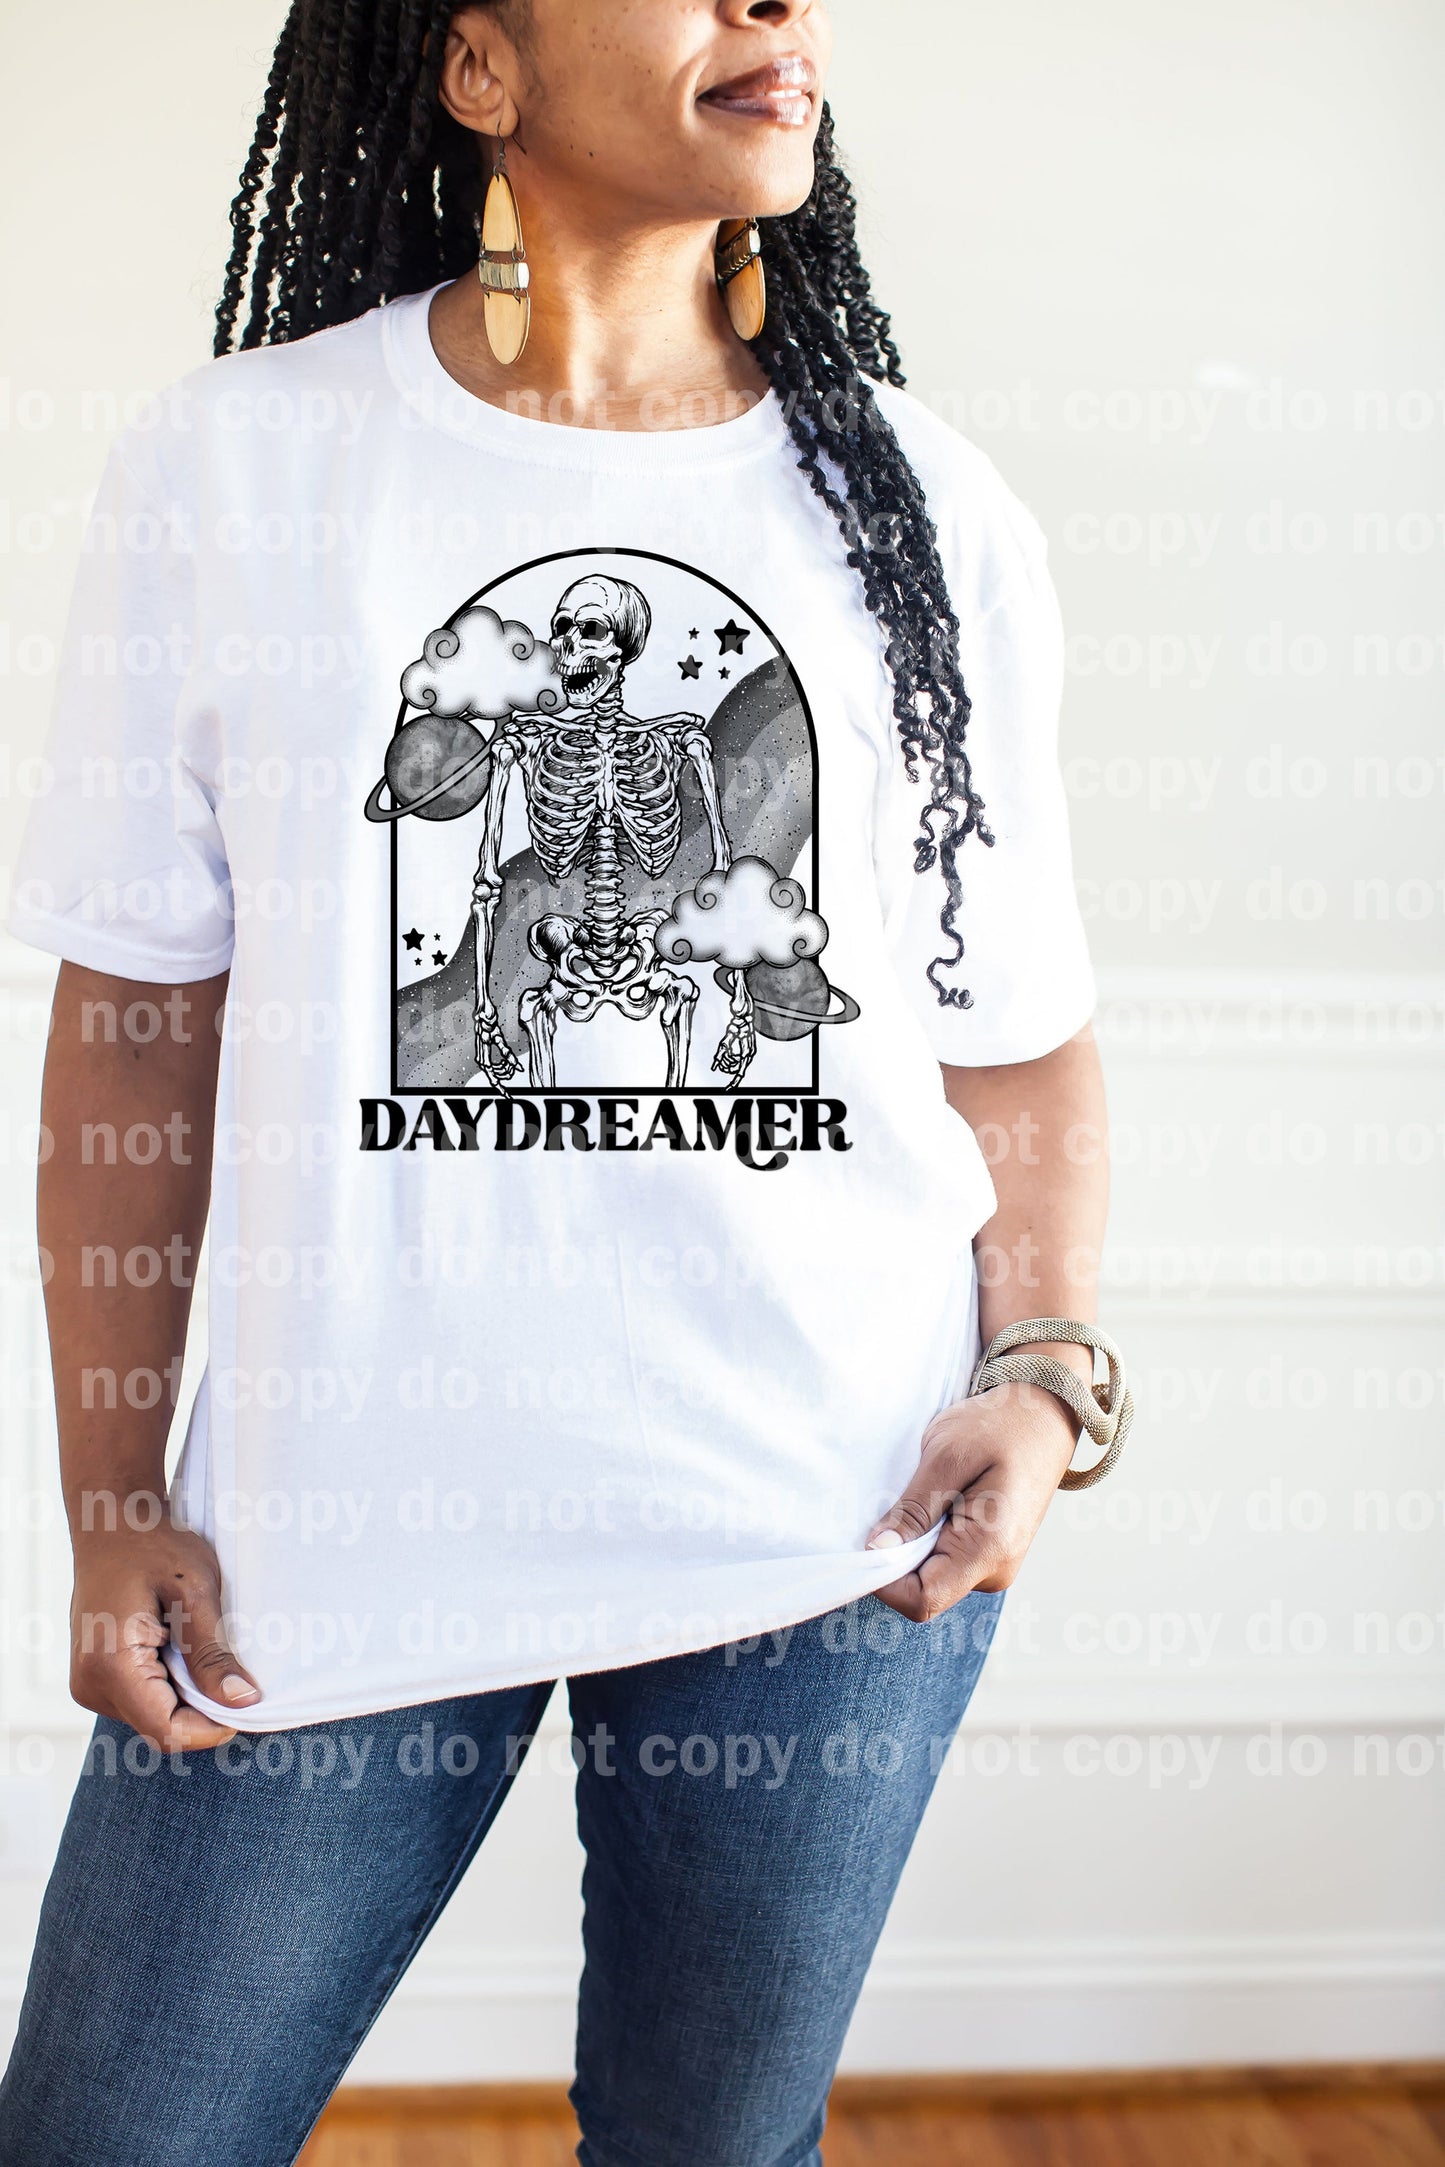 Daydreamer Dream Print or Sublimation Print